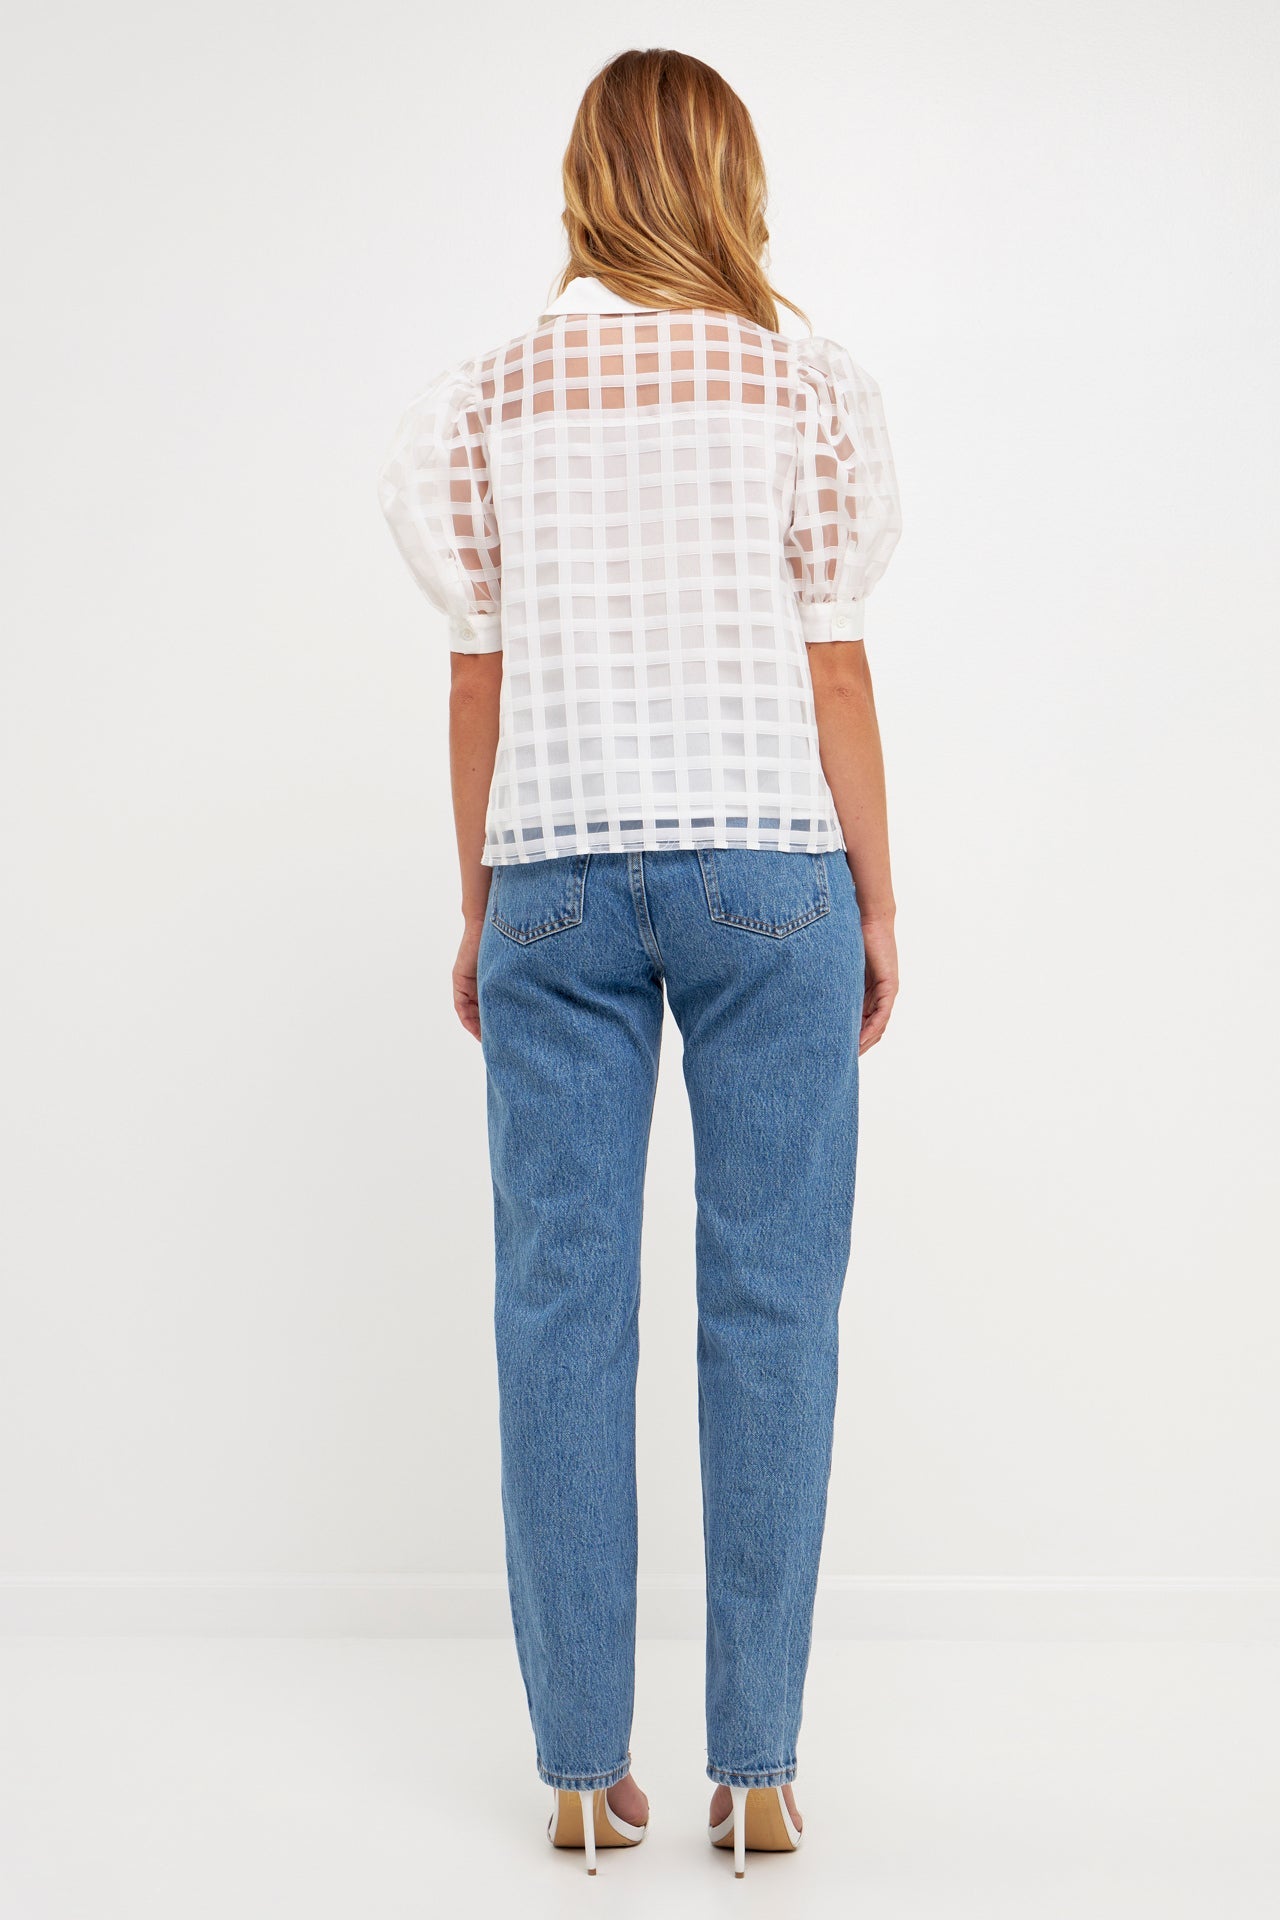 ENGLISH FACTORY-Short Sleeve Organza Grid Blouse-TOPS available at Objectrare